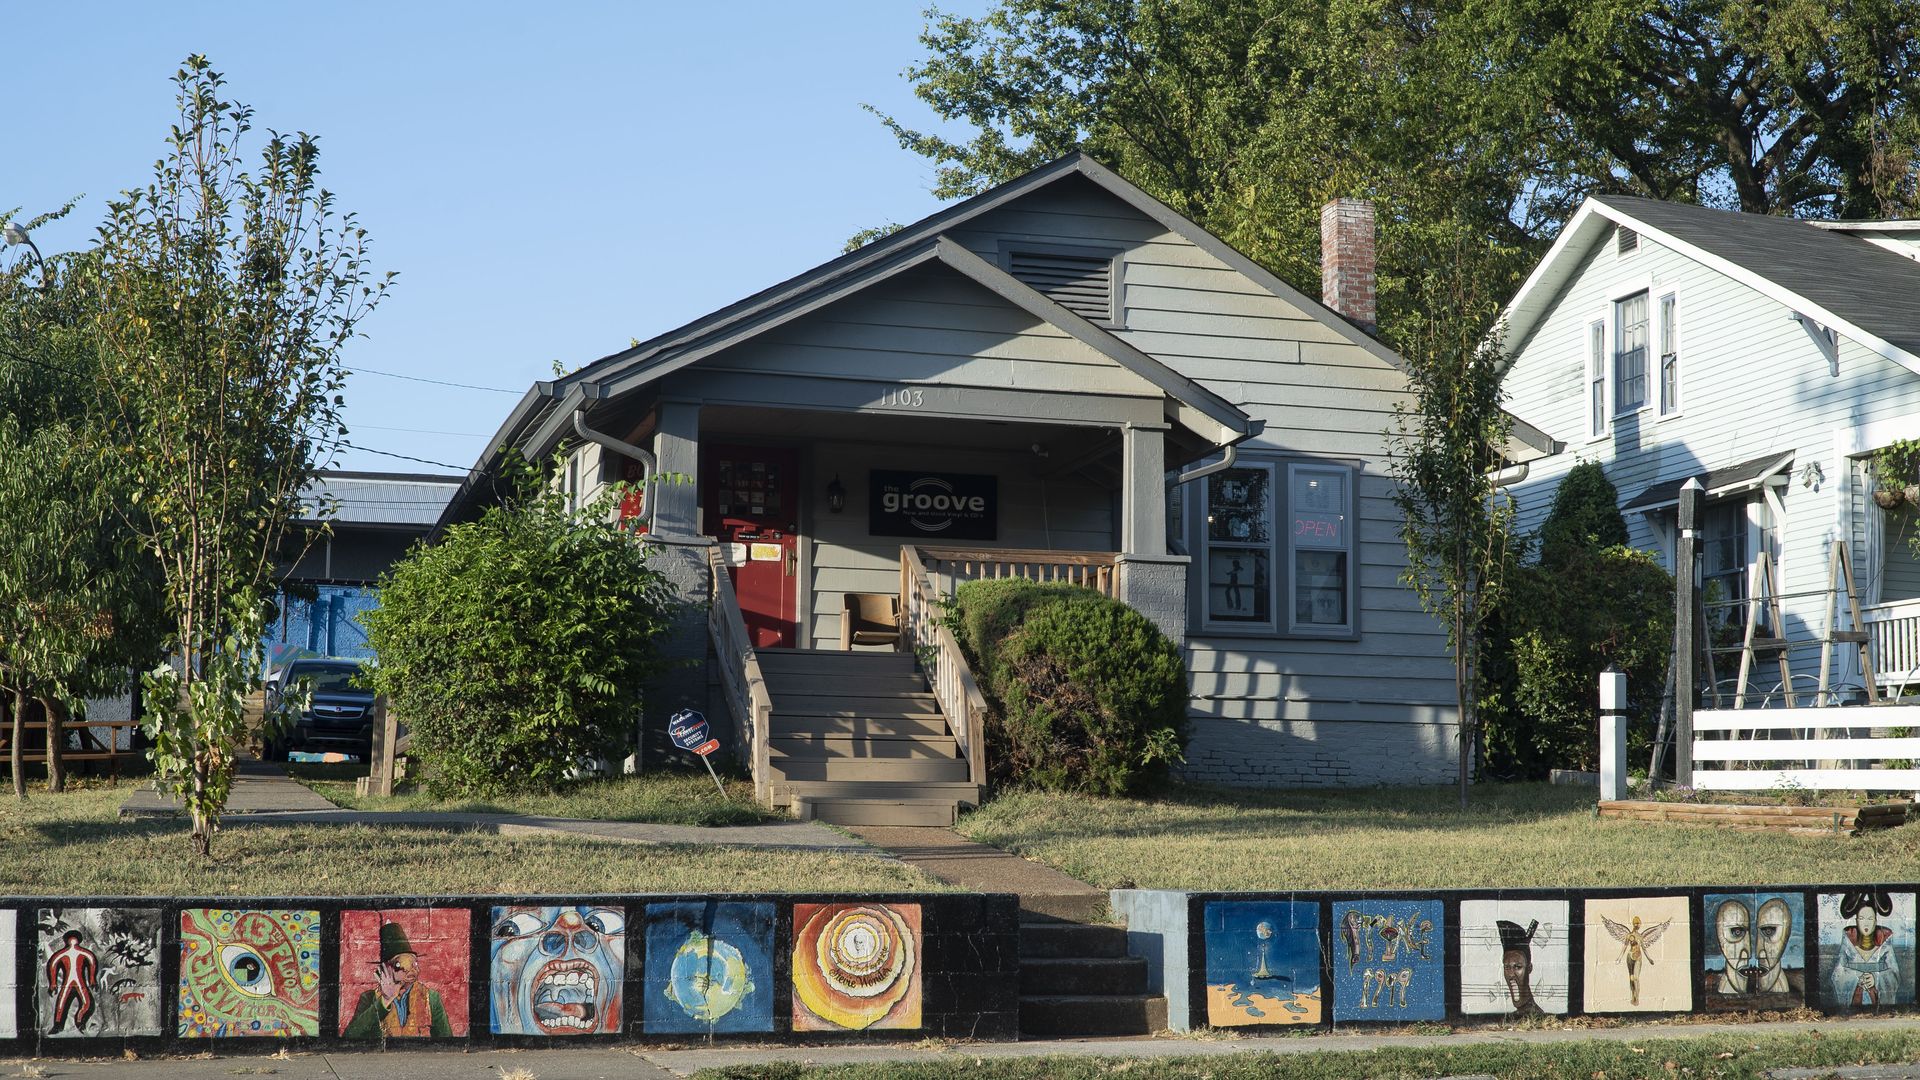 The blue house that is home to The Groove record store.